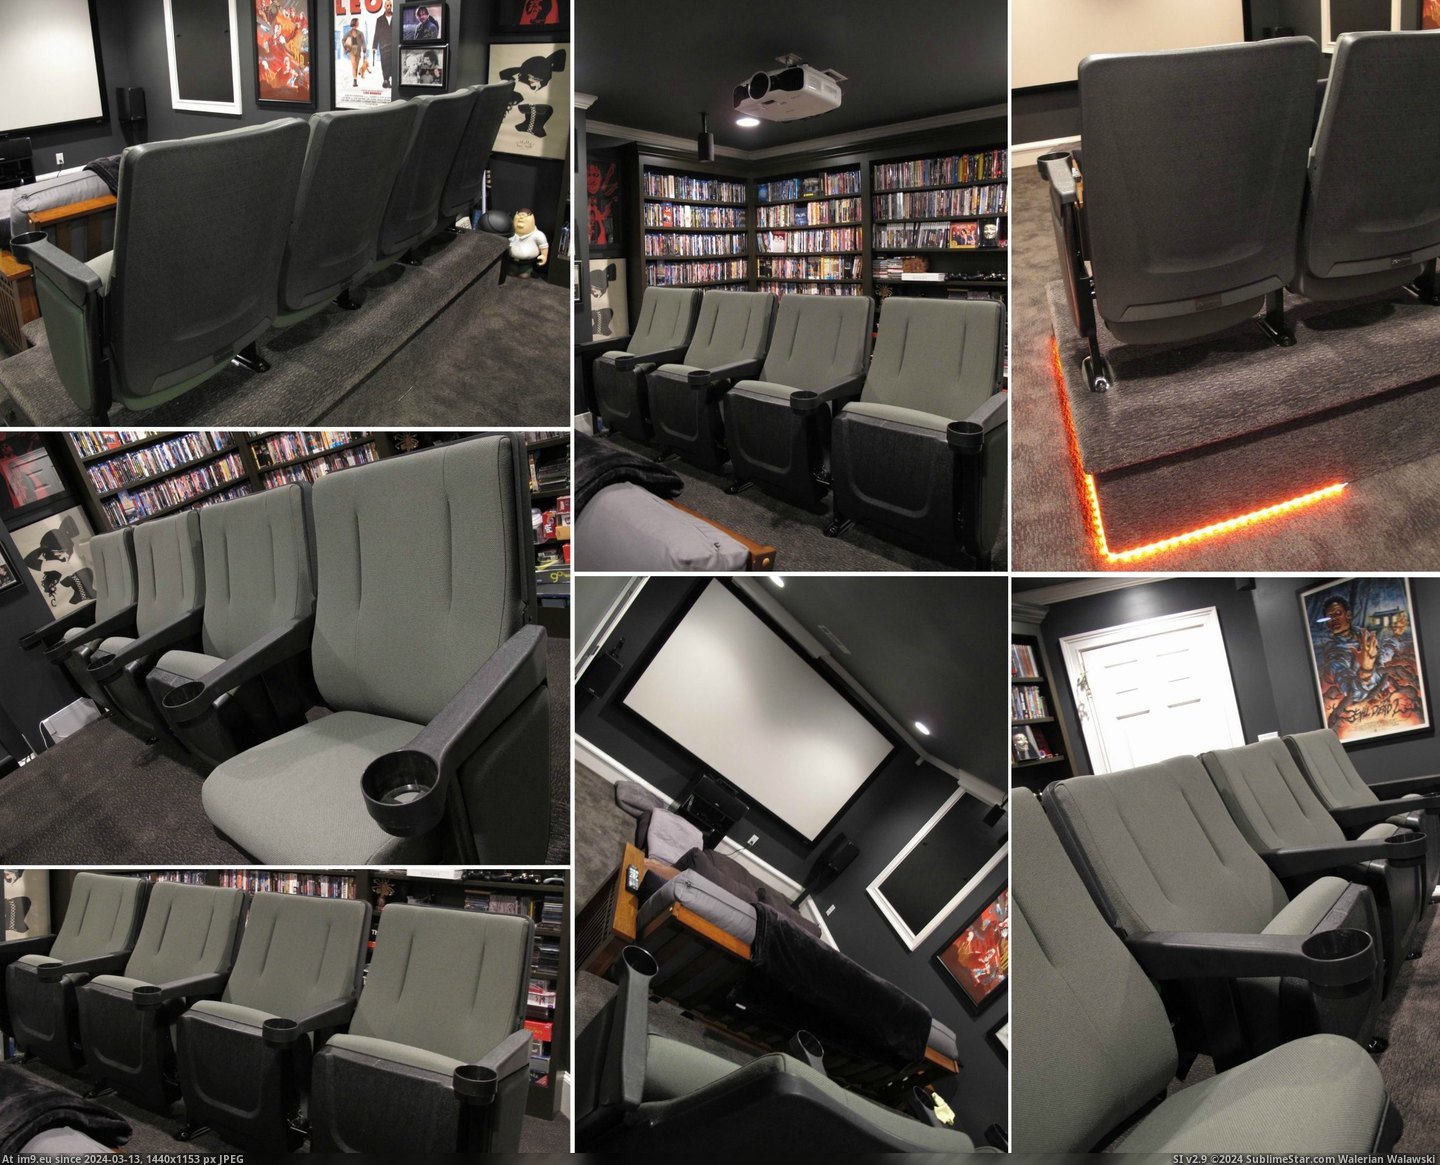 #Gaming #You #Movie #See #Theater #Added #Seats #Room #Wanted #Lot [Gaming] A lot of you wanted to see my movie-gaming room after the theater seats were added. Well...here ya go. :-) Pic. (Obraz z album My r/GAMING favs))